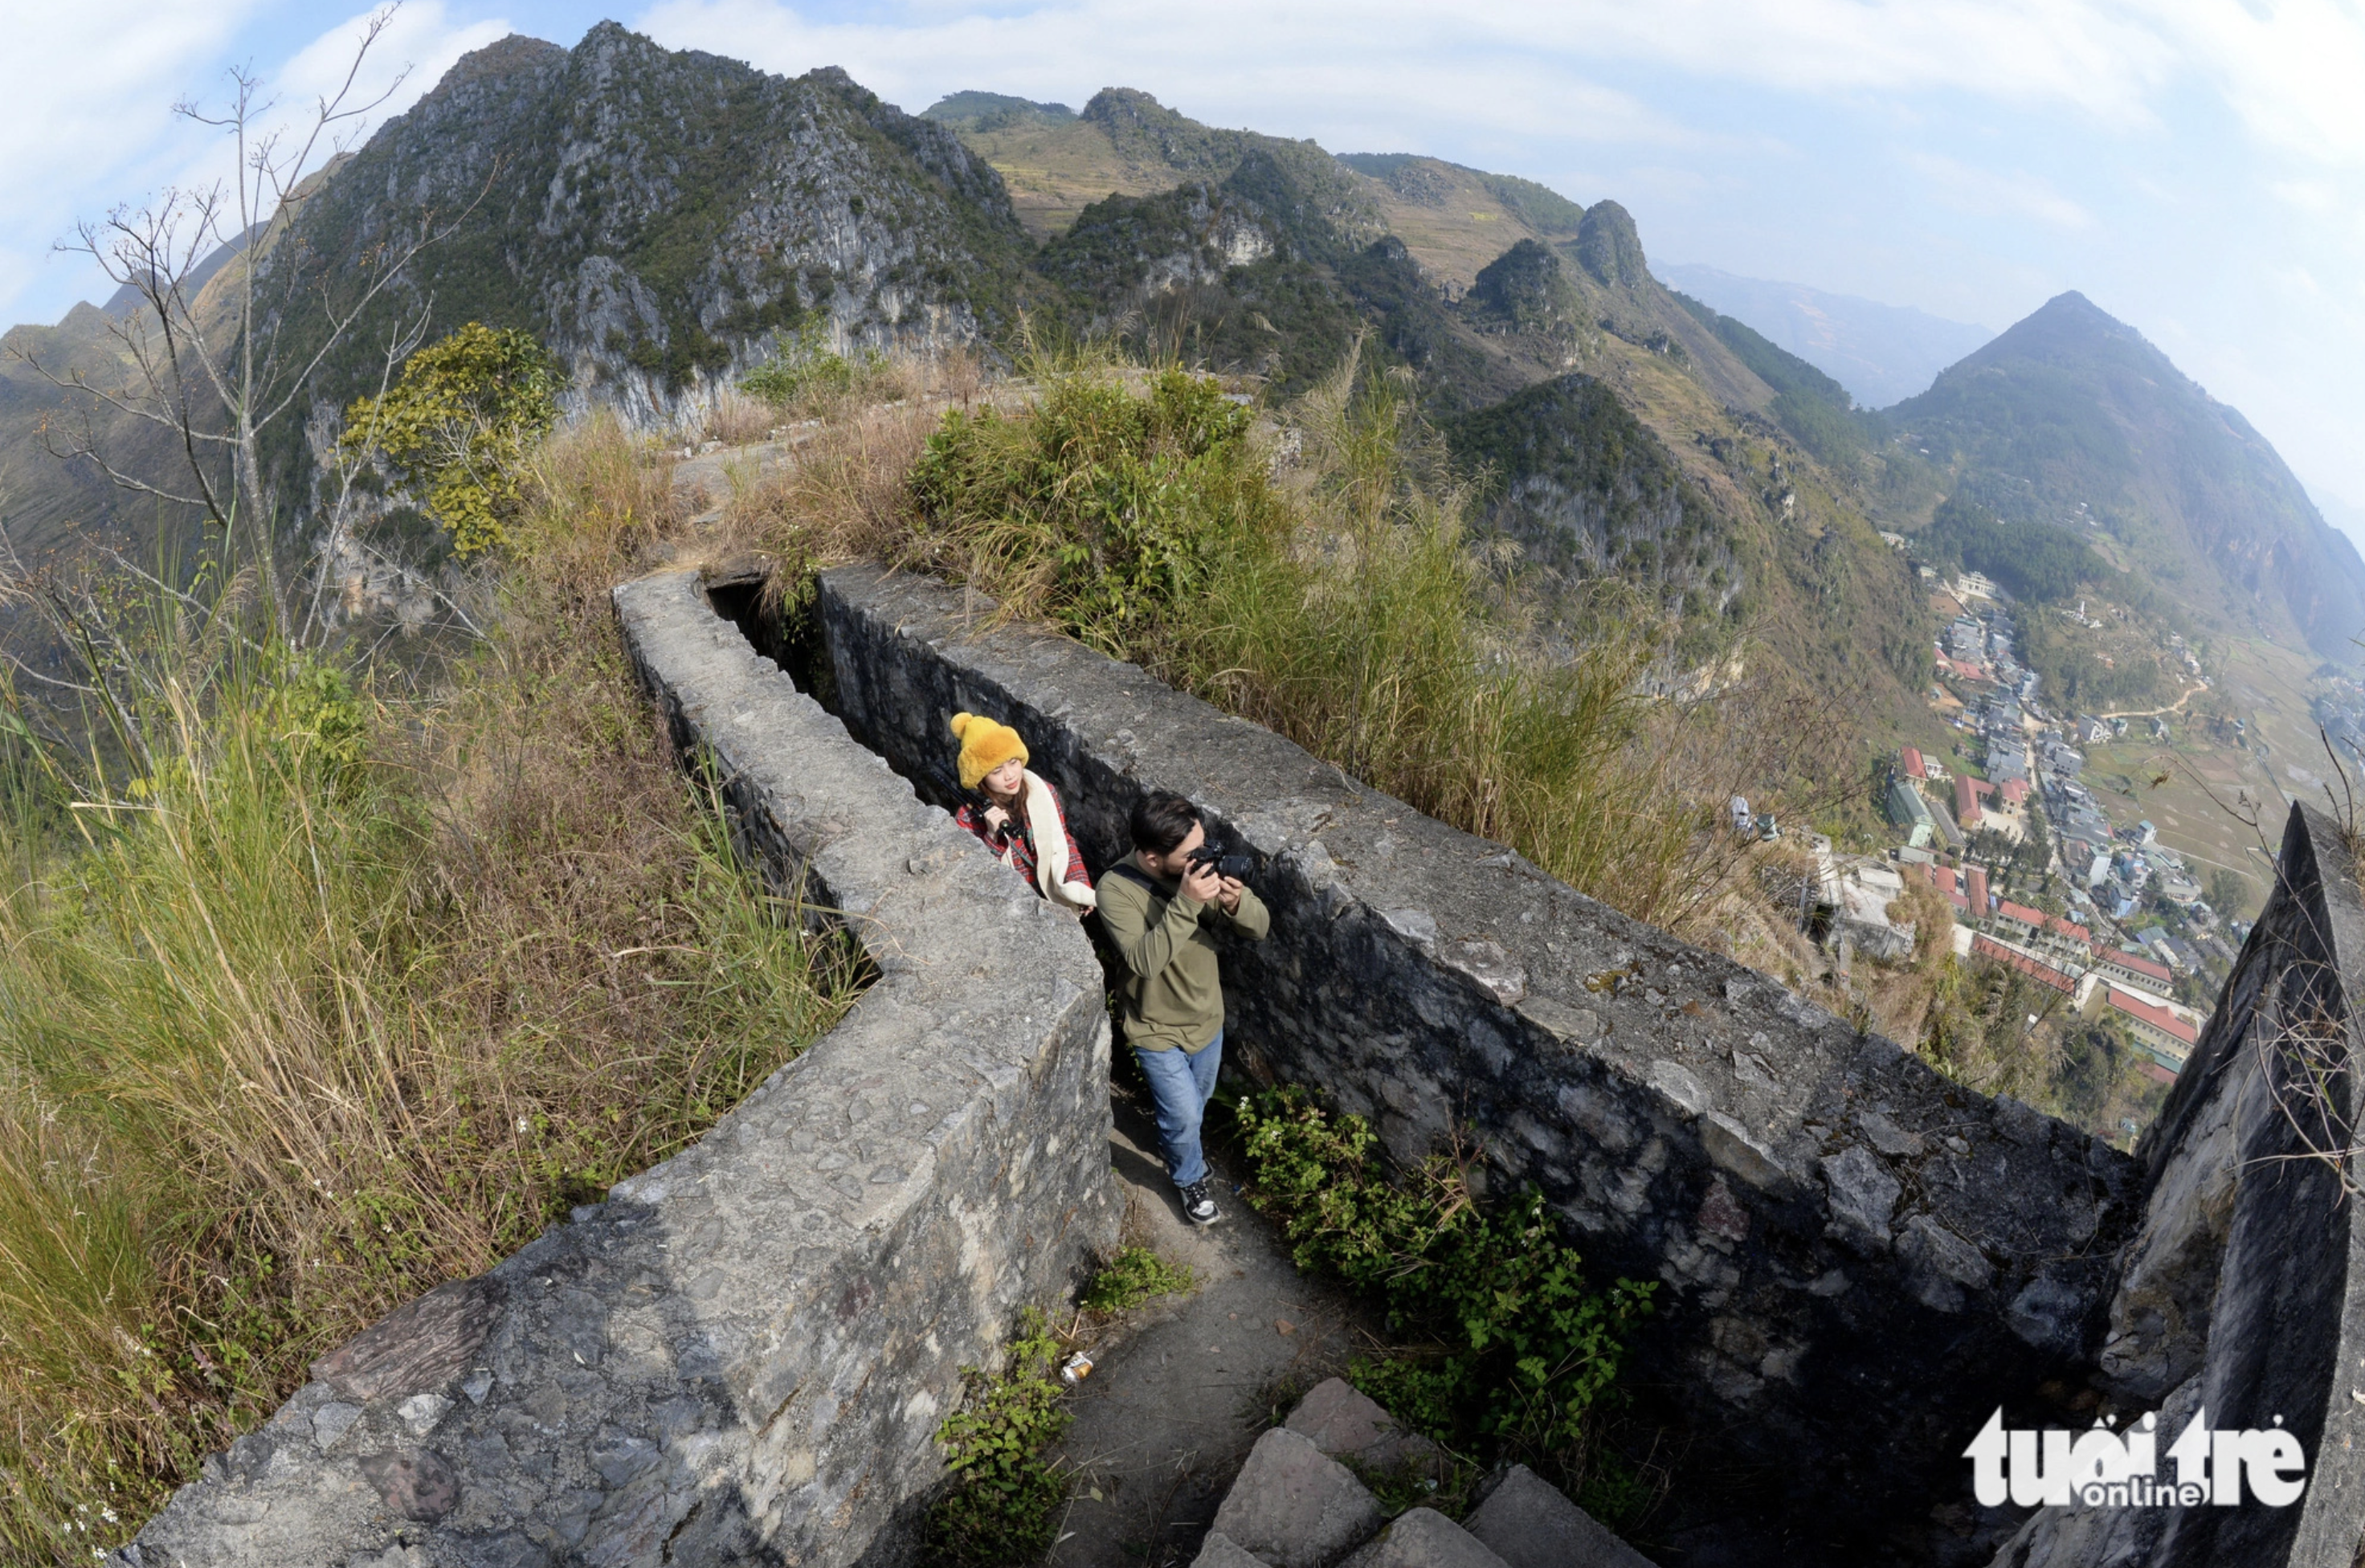 Visitors explore Cao (High) Military Post in Ha Giang Province. Photo: T.T.D. / Tuoi Tre